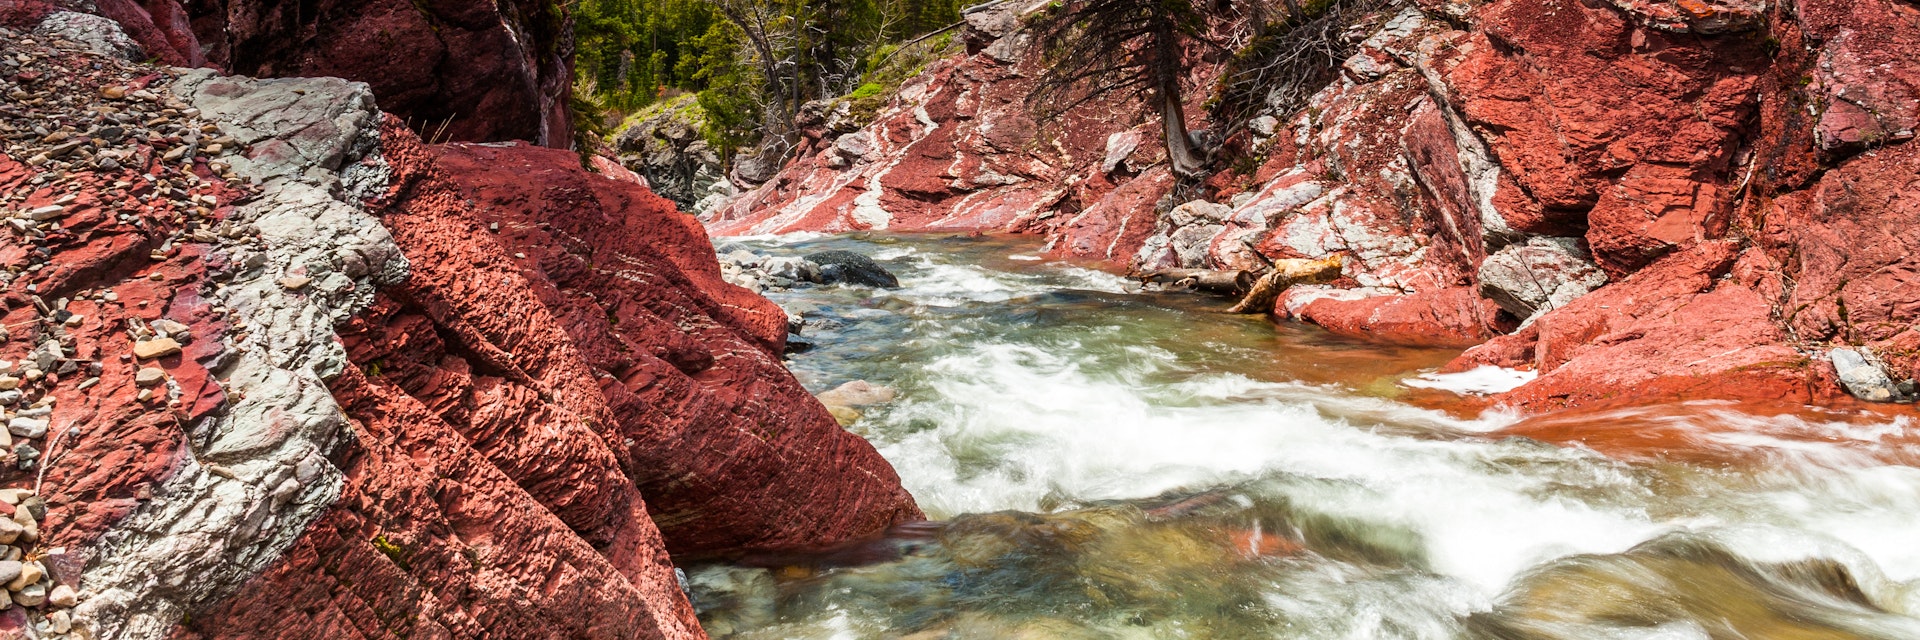 Red Rock creek in motion and canyon in Waterton Lakes National park, alberta, canada; Shutterstock ID 366870593; purchase_order: 65050; job: ; client: ; other:
366870593